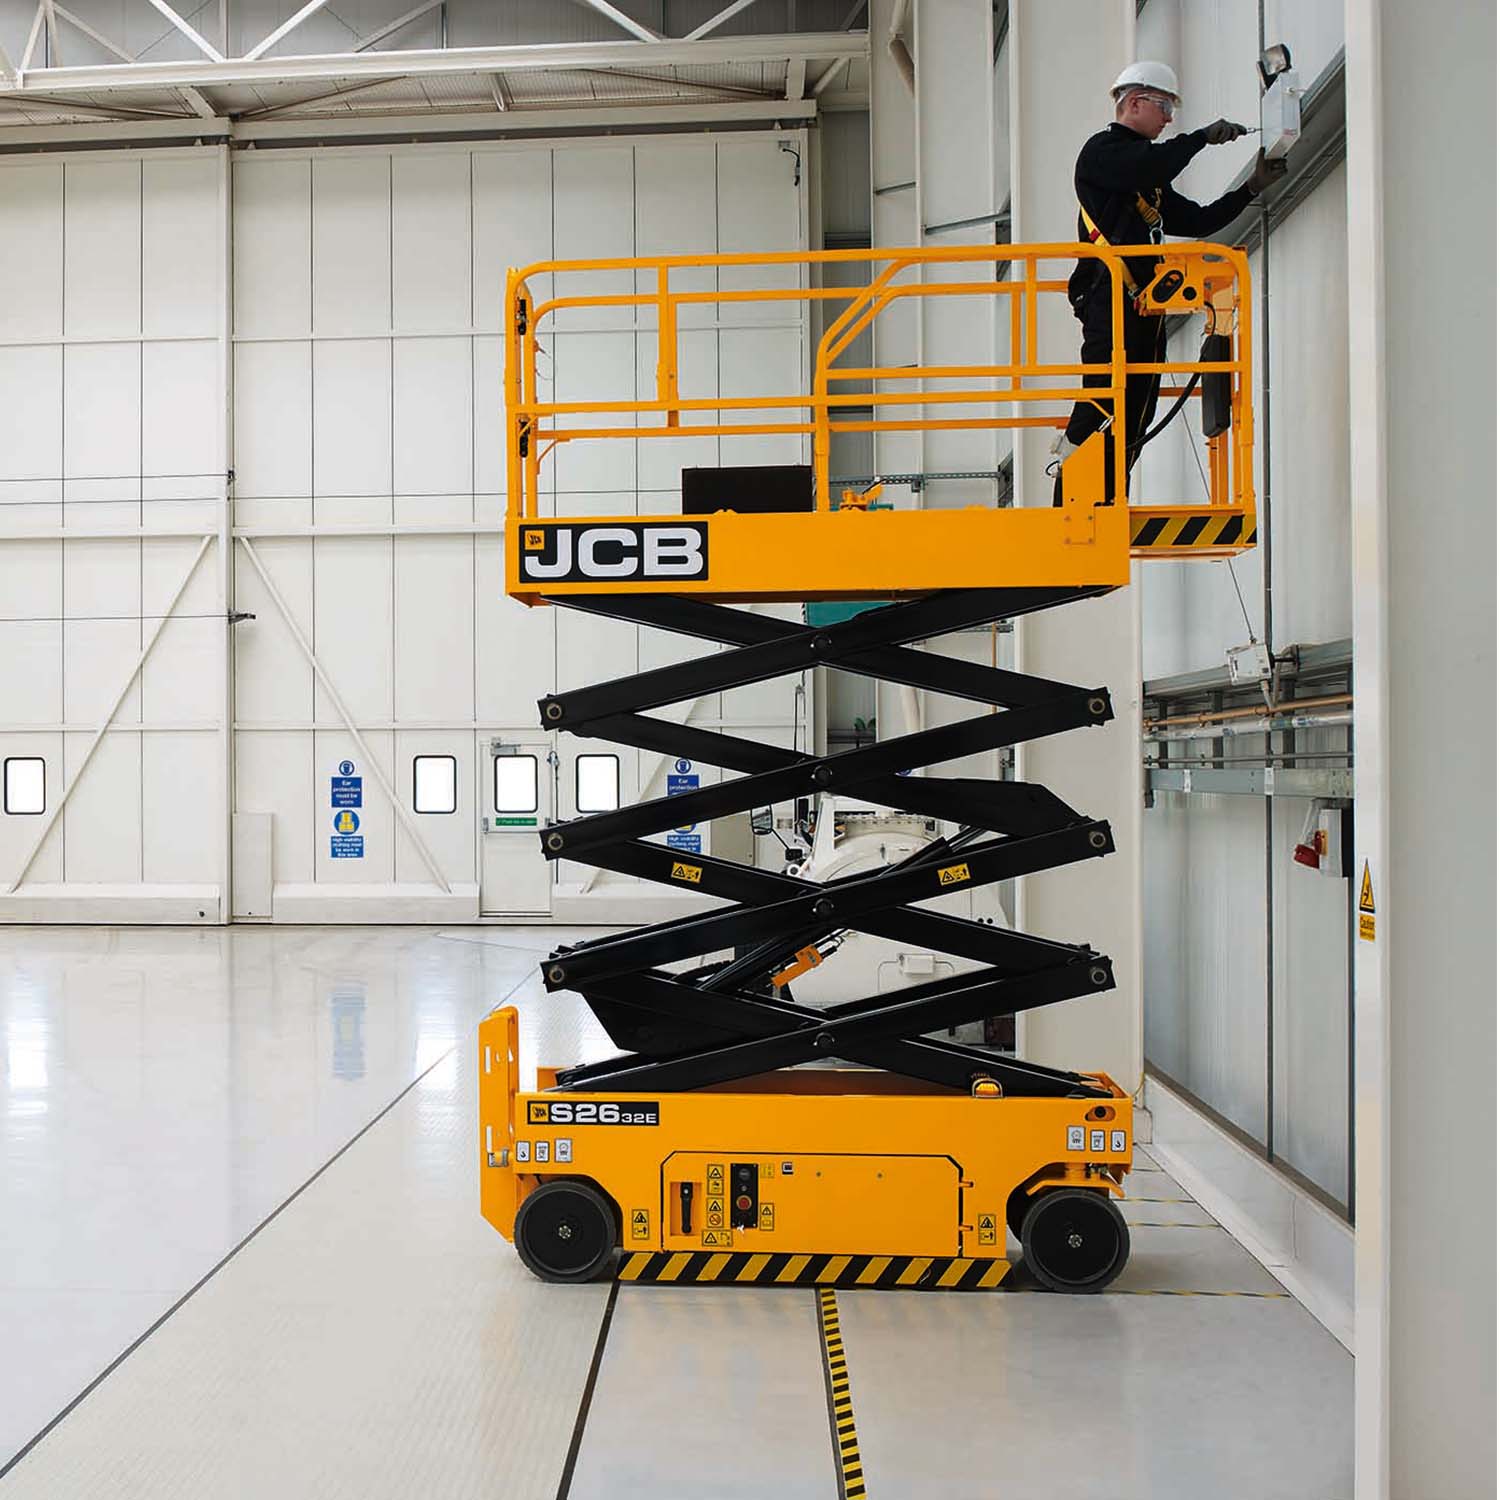 We've got a scissor lift for everyone! A Plant-Fit Scissor lift is easy to use and very maneuverable!